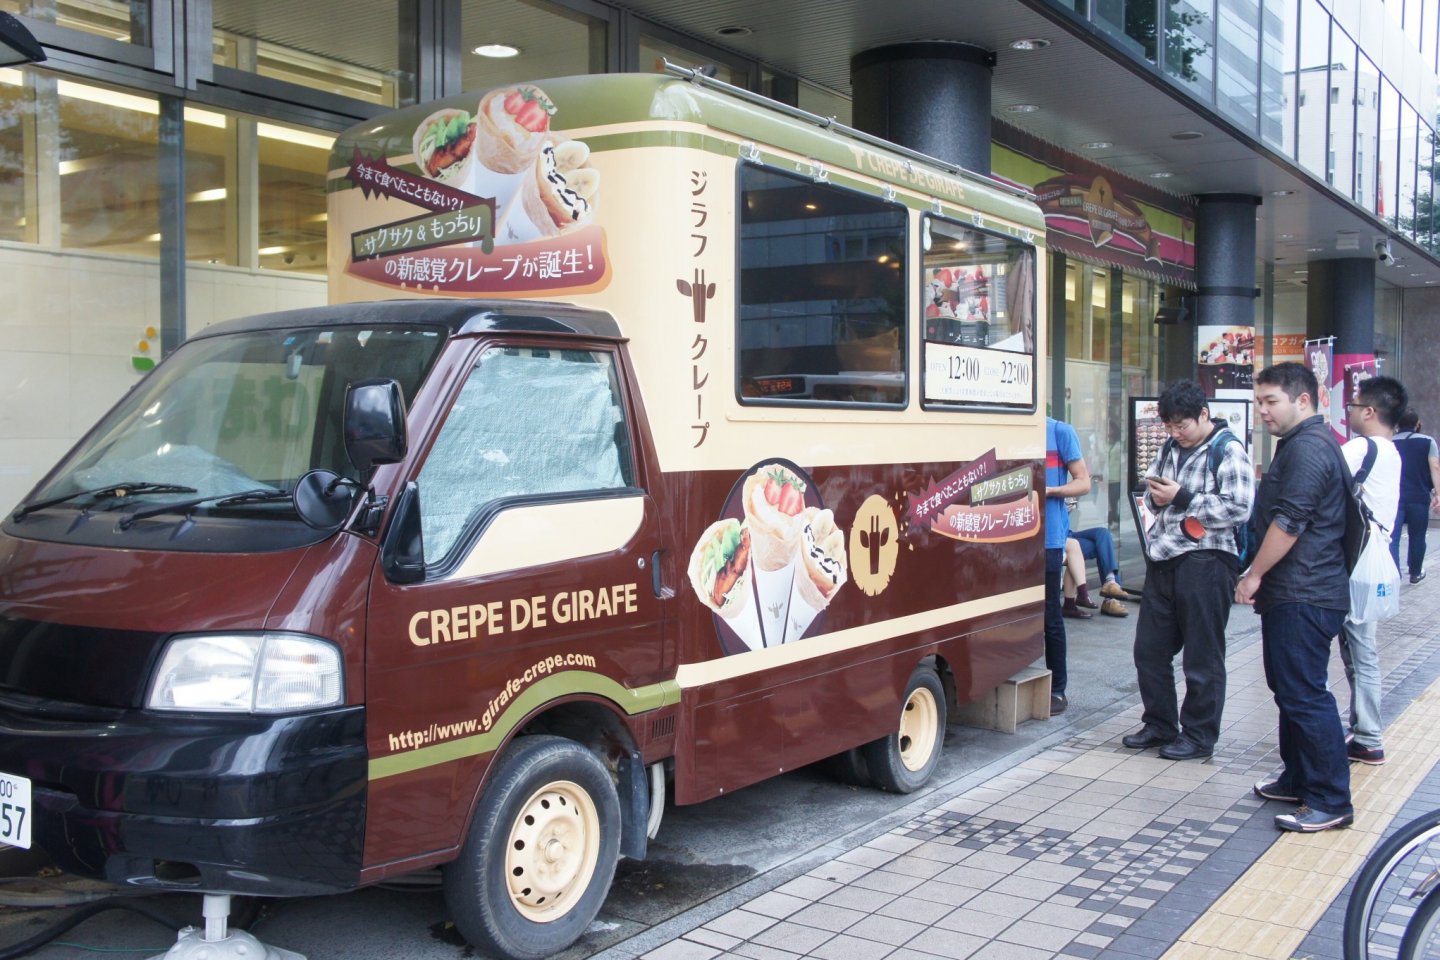 The Giraffe Crepe food truck with a queue of eager costumers